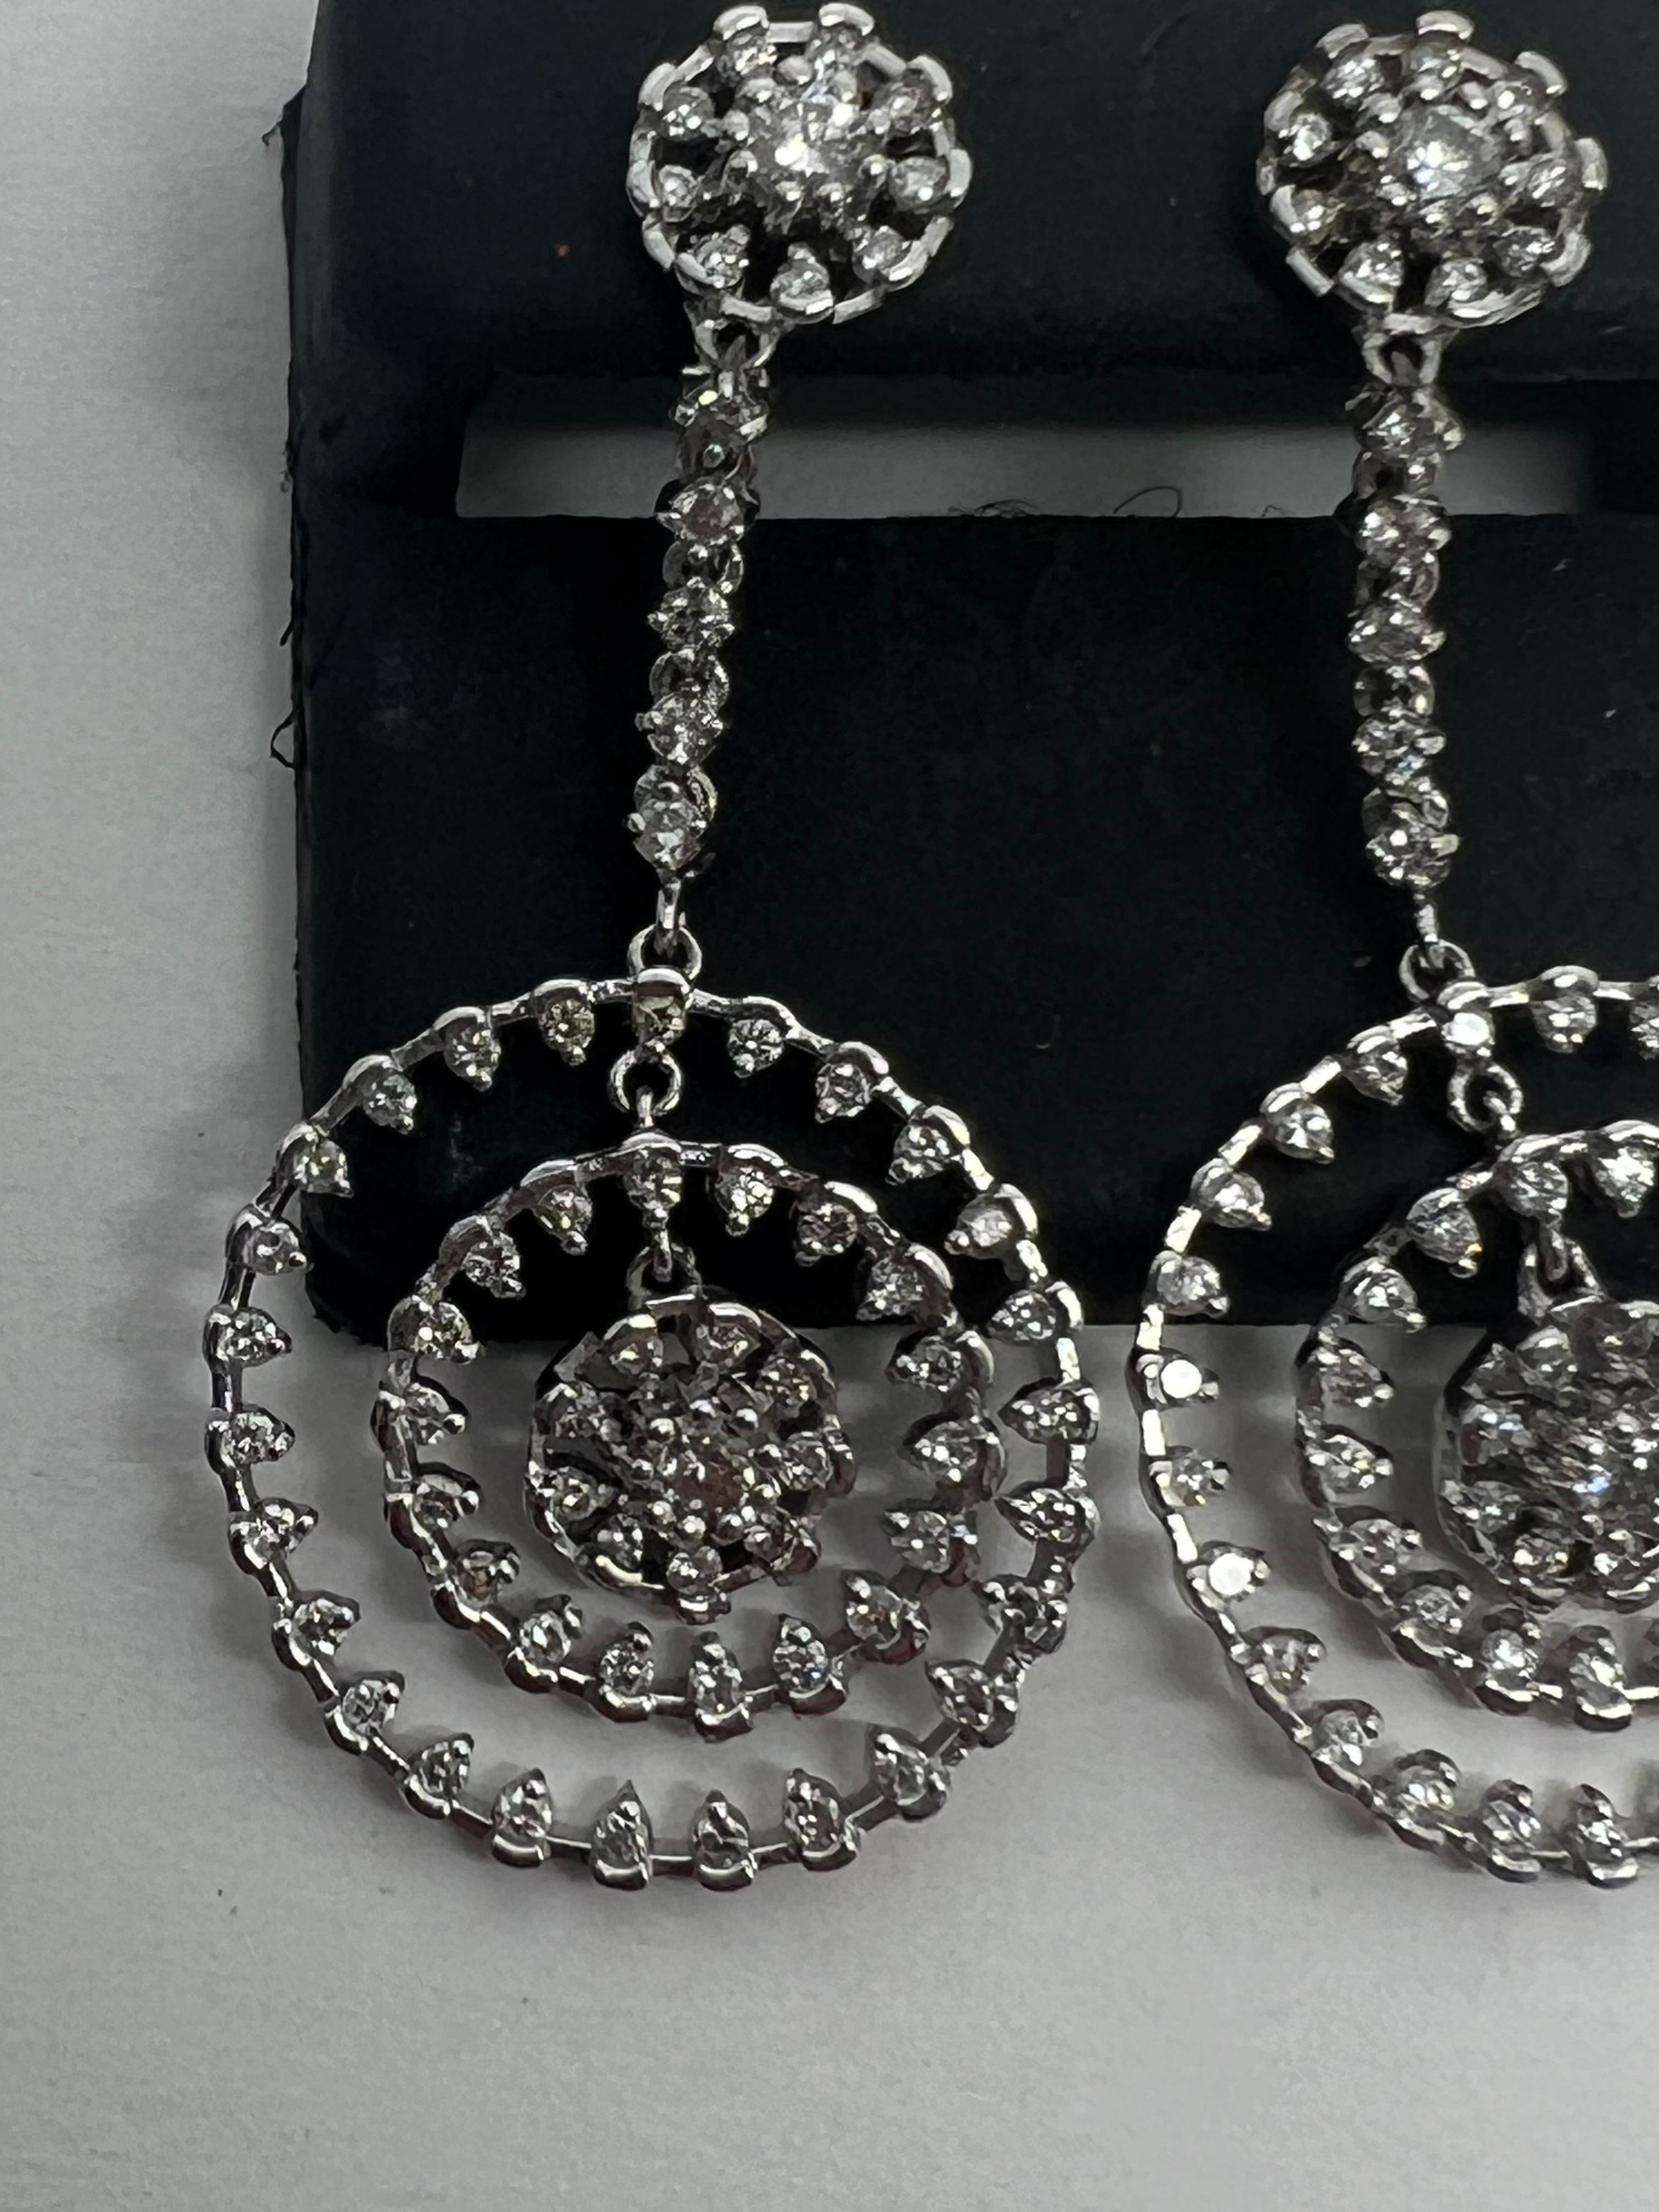 Elevate your style with these stunning 14k White Gold Diamond Drop Dangle Circle Pave Earrings. Crafted with exquisite attention to detail, these earrings feature natural round diamonds set in a pavé style, creating a shimmering effect that will